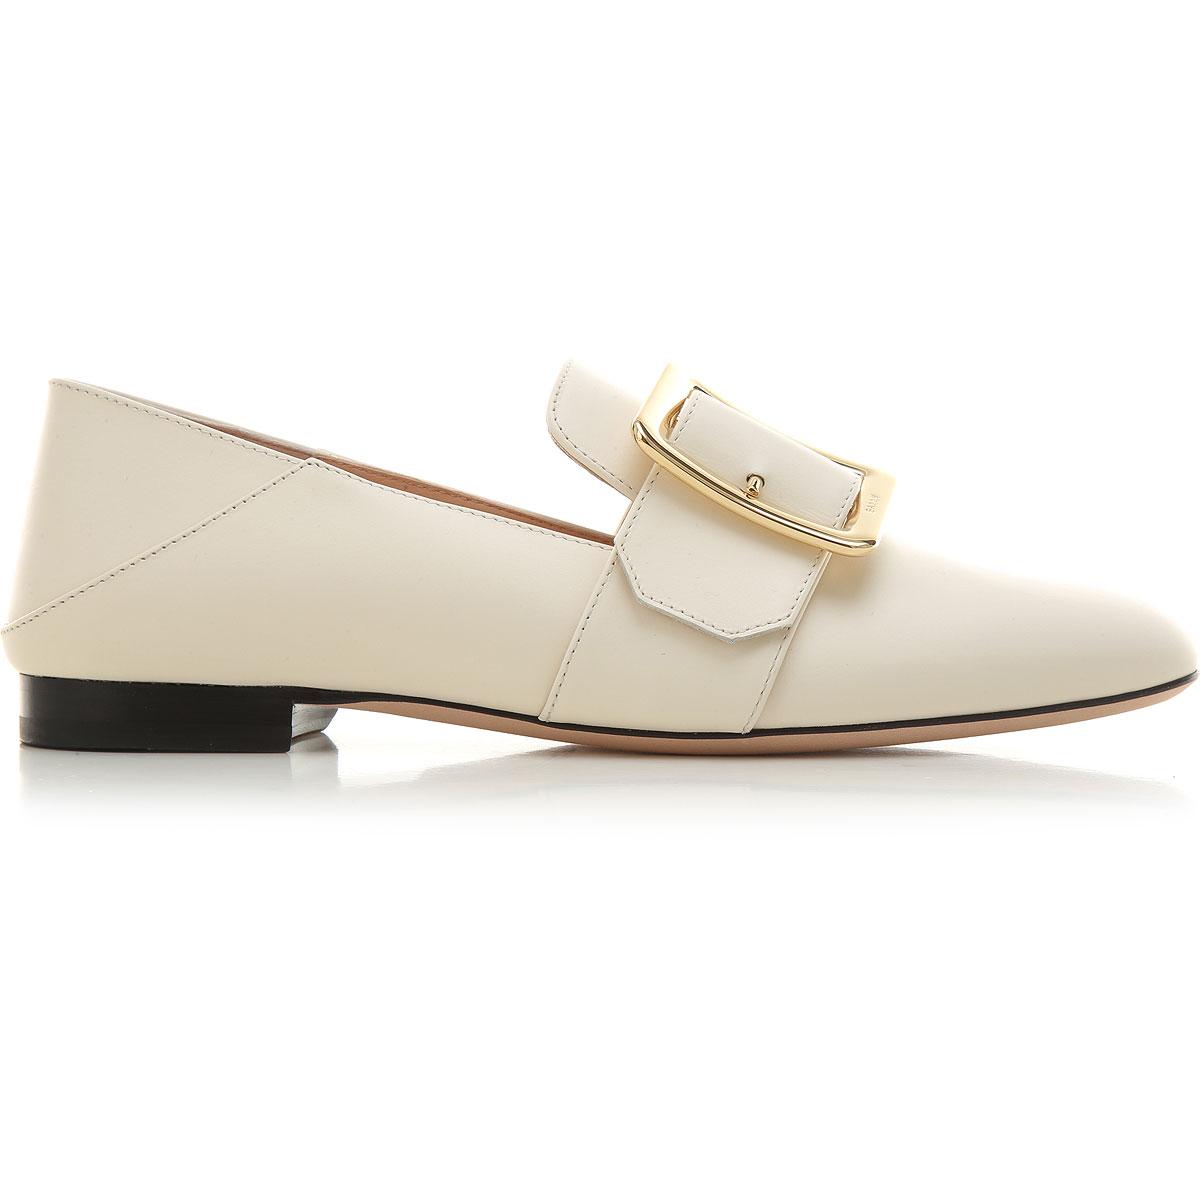 Bally Loafers For Women in White - Lyst